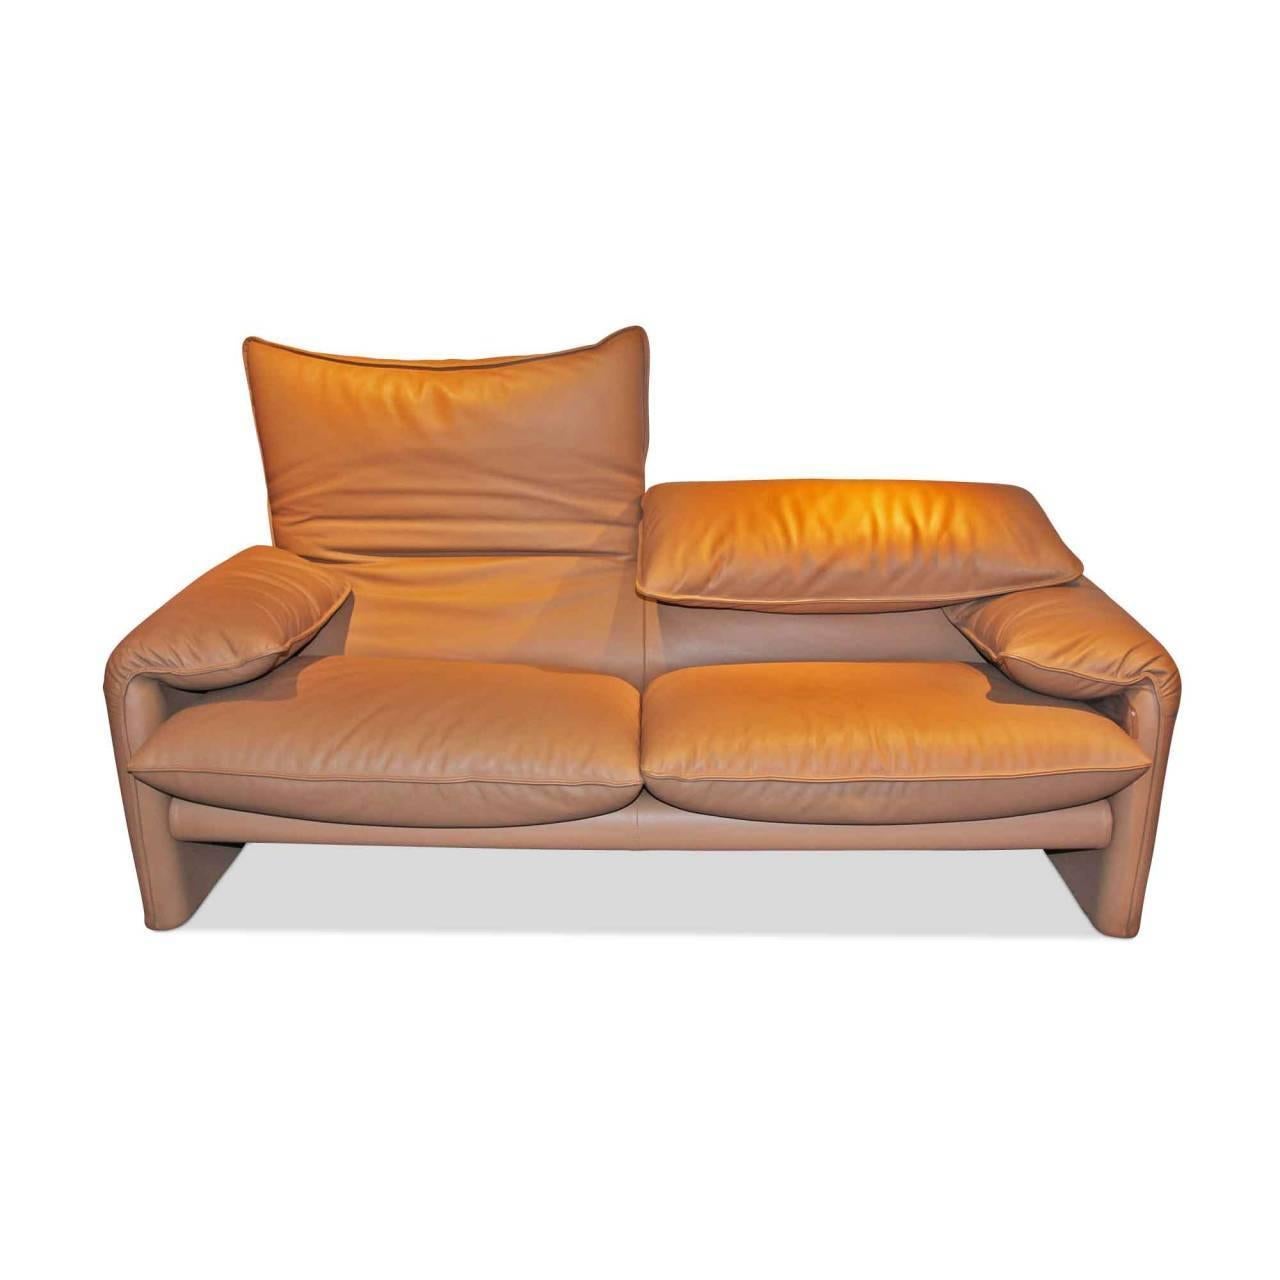 With pleasure we present to you the sofa 